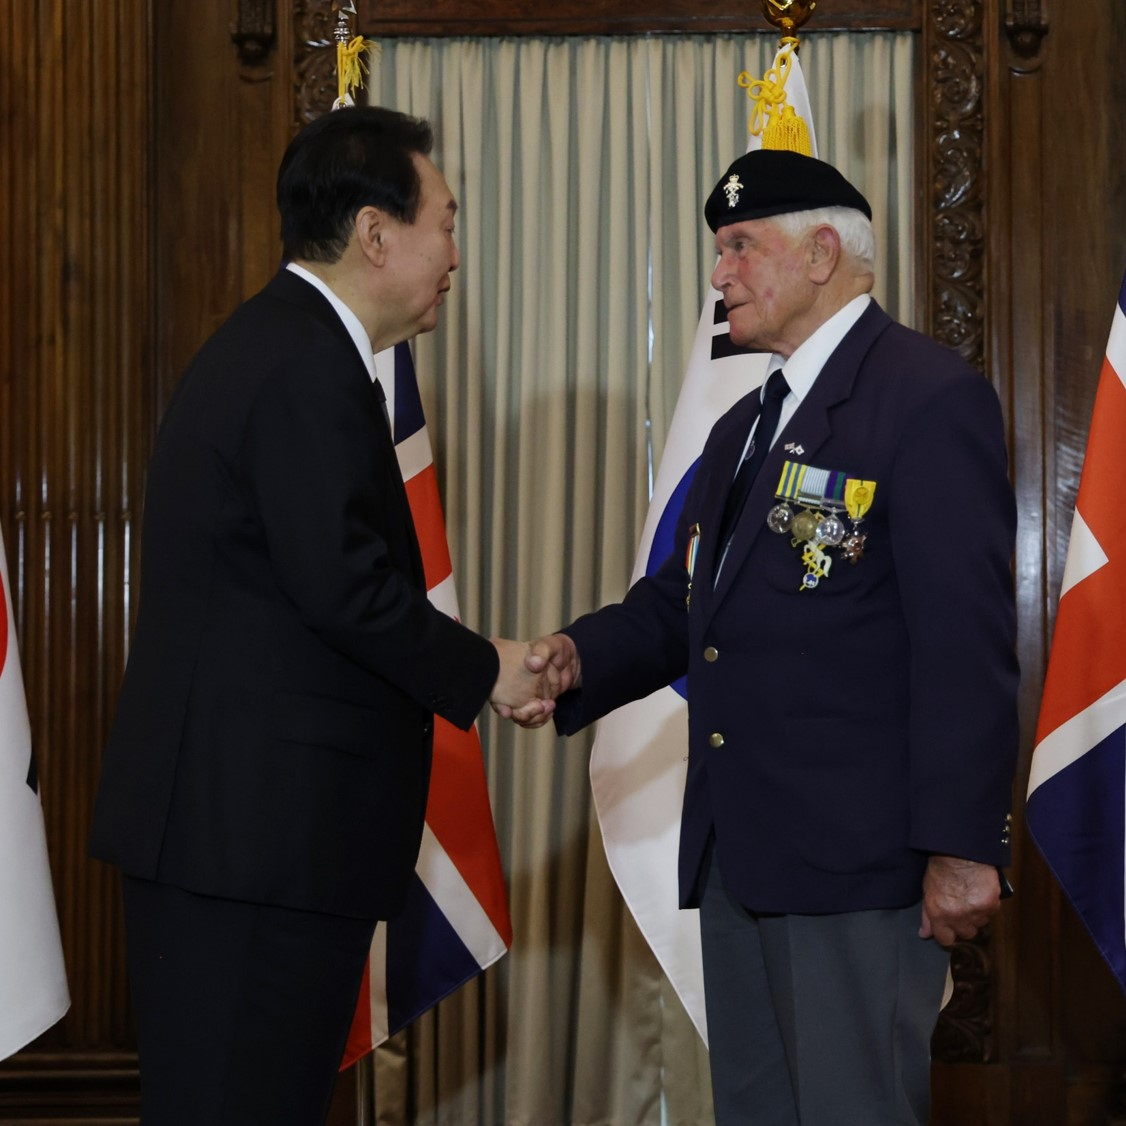 President Yoon Suk-yeol confers the Civil Merit Medal on Victor Swift, a British Korean War veteran, at a London hotel on Monday in recognition of his sacrifice and dedication to the defense of peace. (Yonhap)